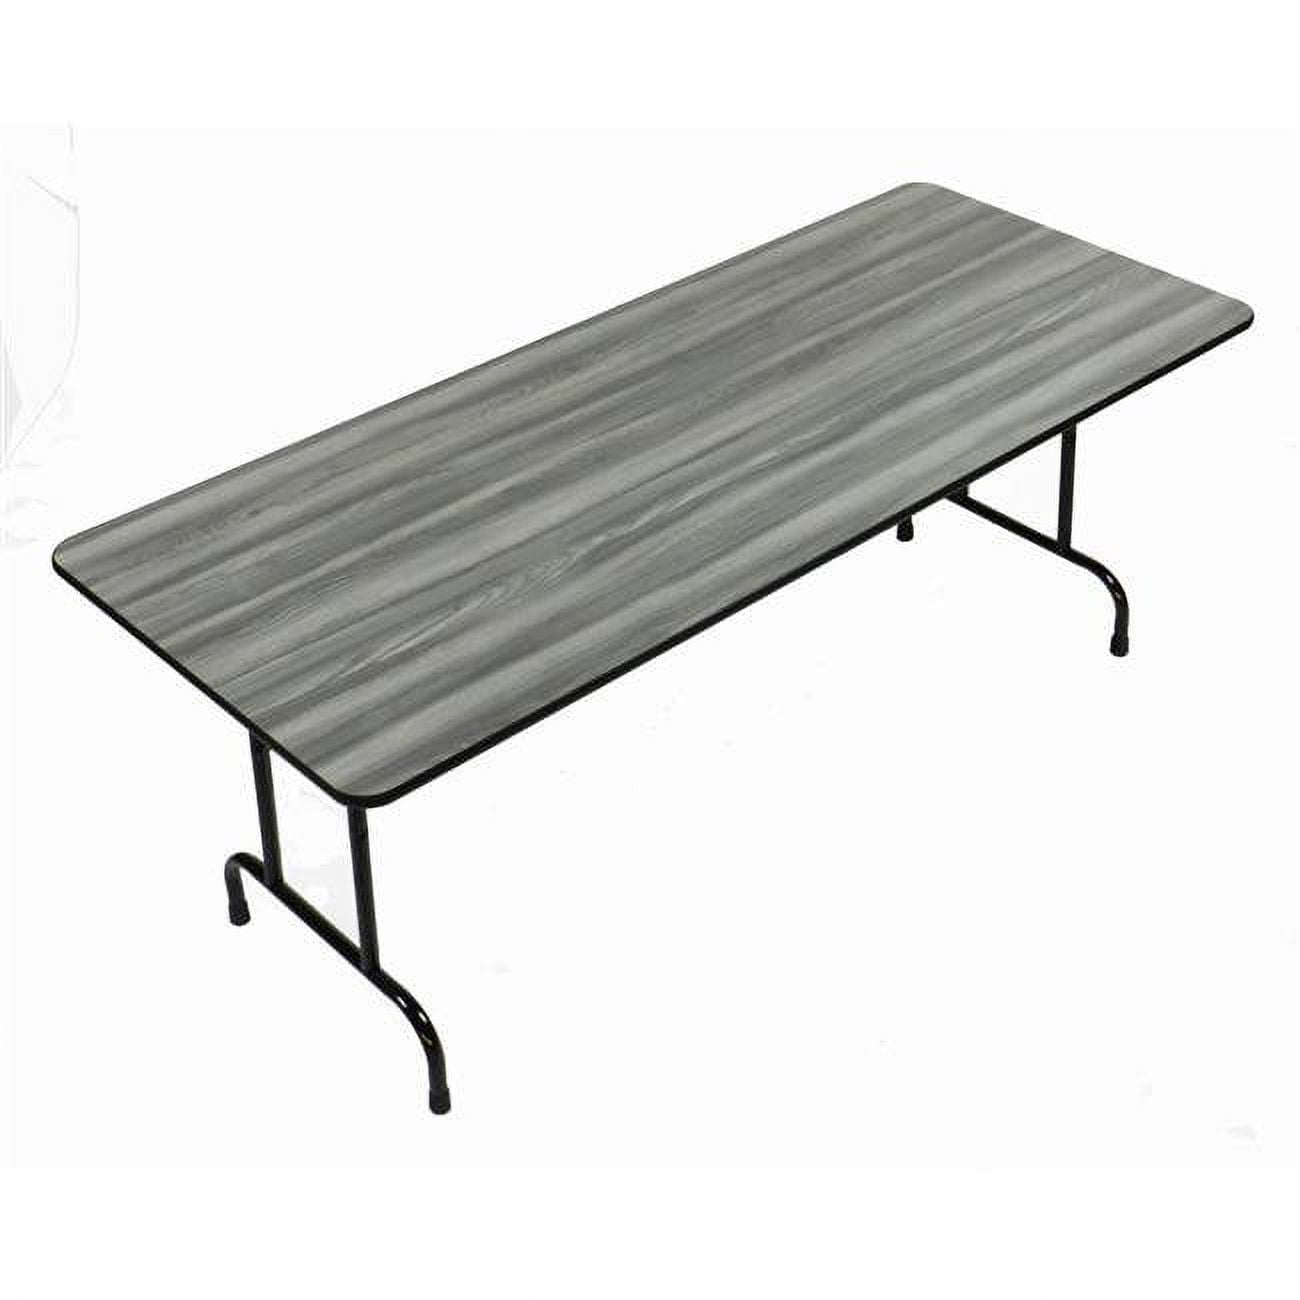 Picture of Correll CF2460PX-52 0.75 in. High Pressure Rectangular Top Folding Tables, New England Driftwood - 24 x 60 in.